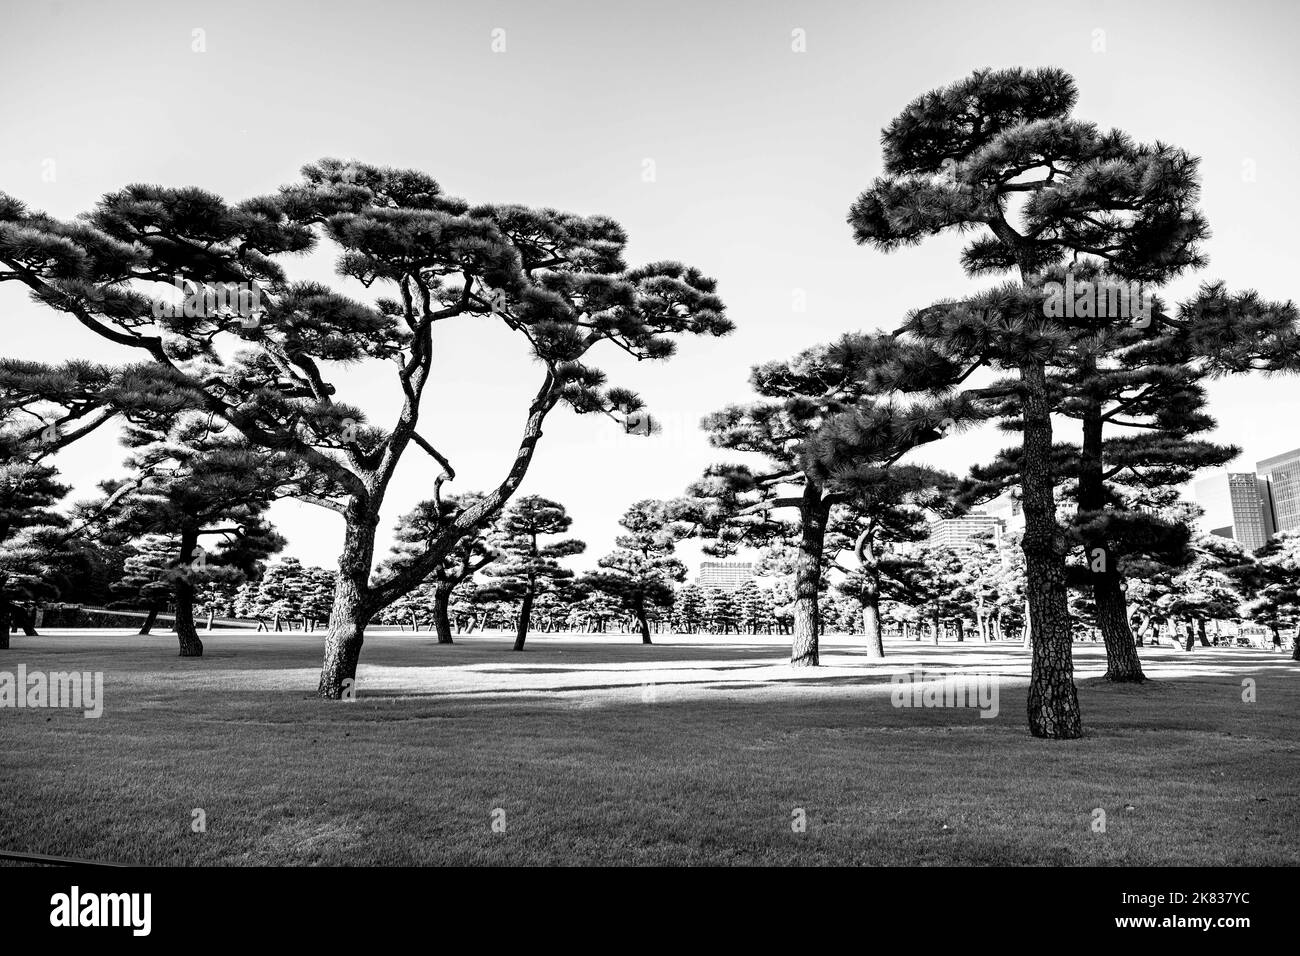 Tokyo, Japan. 20th Oct, 2022. October 20, 2022, Tokyo, Japan: Japanese black pine trees at the Kokyo Gaien National Garden in the front gardens of the Imperial Palace, filled with parkgoers in the autumn. Monarchy, emperor, chrysanthemum throne...Chiyoda City is the center of the Japanese Government, featuring the Imperial Palace and the National Diet. ..Japan has recently reopened to tourism after over two years of travel bans due to the COVID-19 pandemic. The Yen has greatly depreciated against the USD US Dollar, creating economic turmoil for international trade and the Japanese economy. (Cr Stock Photo